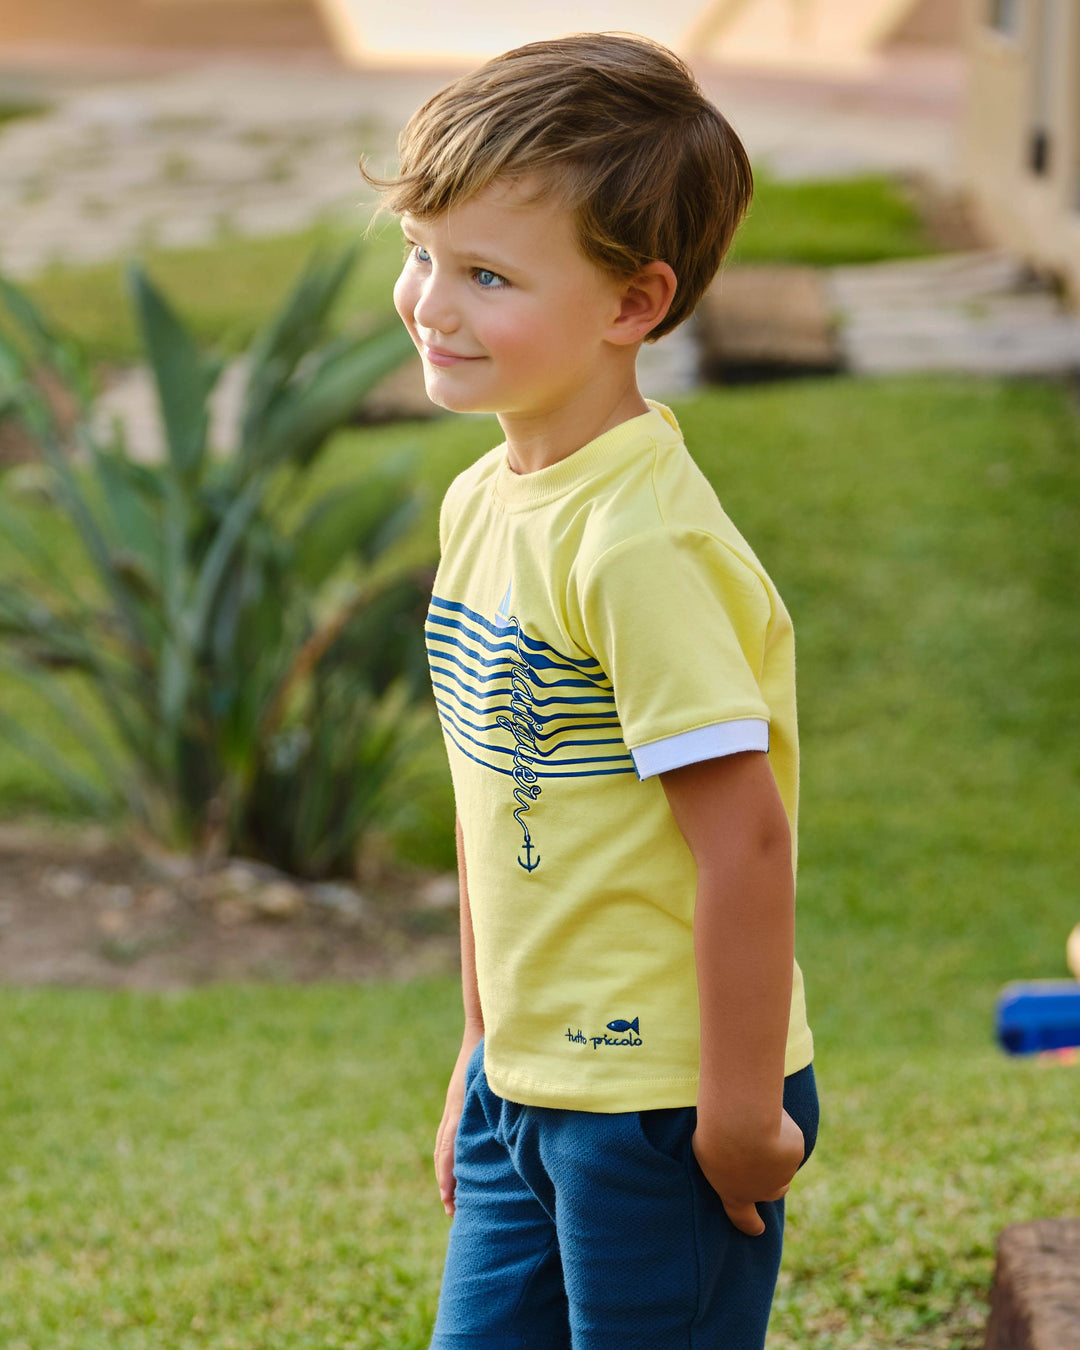 Tutto Piccolo "Ray" Yellow Nautical T-Shirt | Millie and John